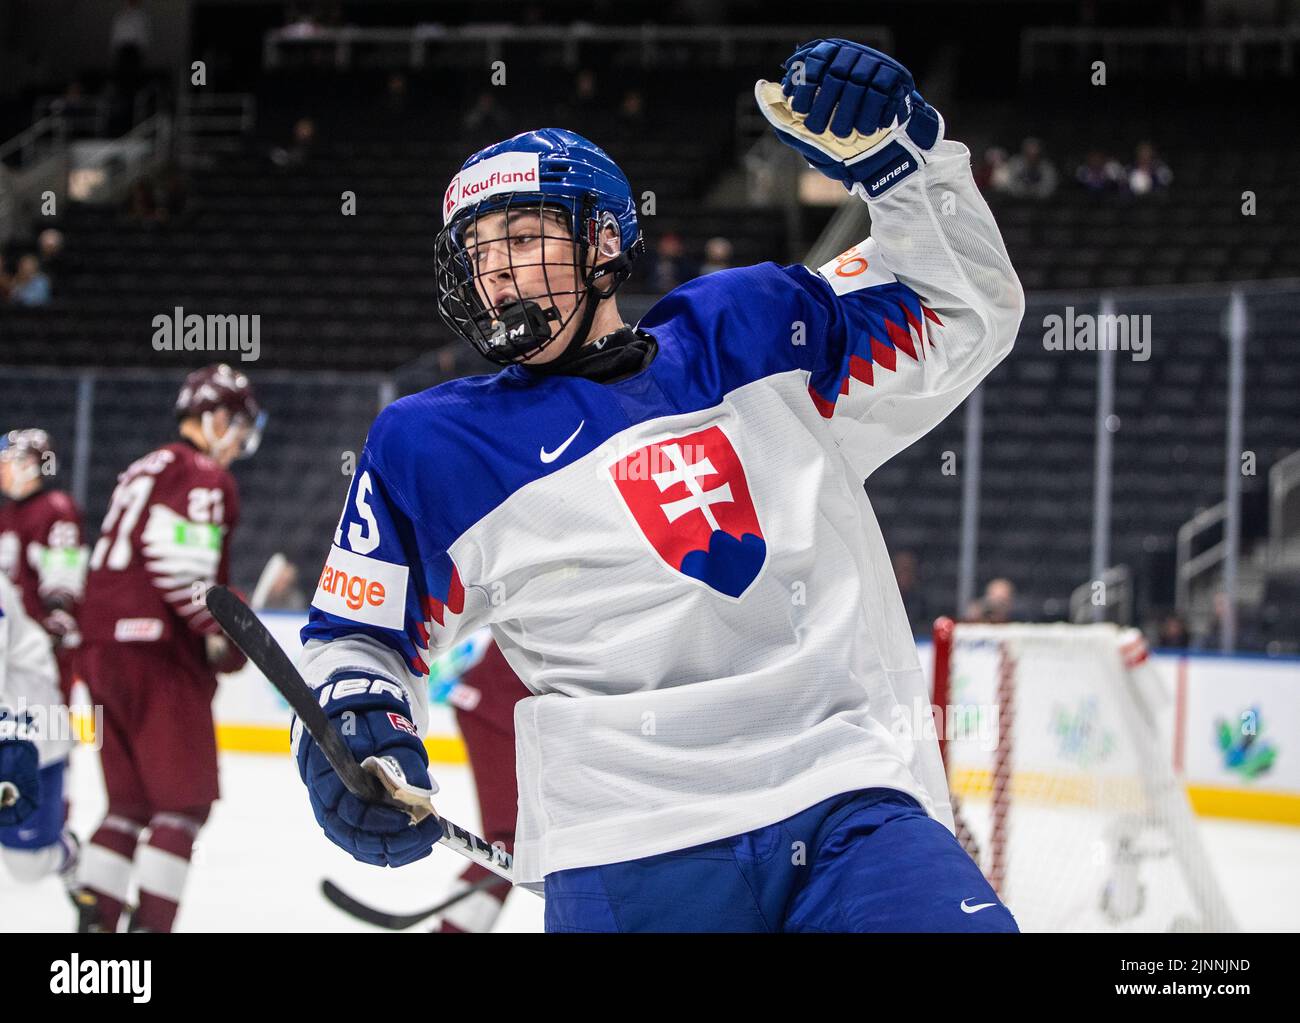 Slovakias Dalibor Dvorsky (15) celebrates a goal against Latvia during the second period of an IIHF junior world hockey championships game Friday, Aug